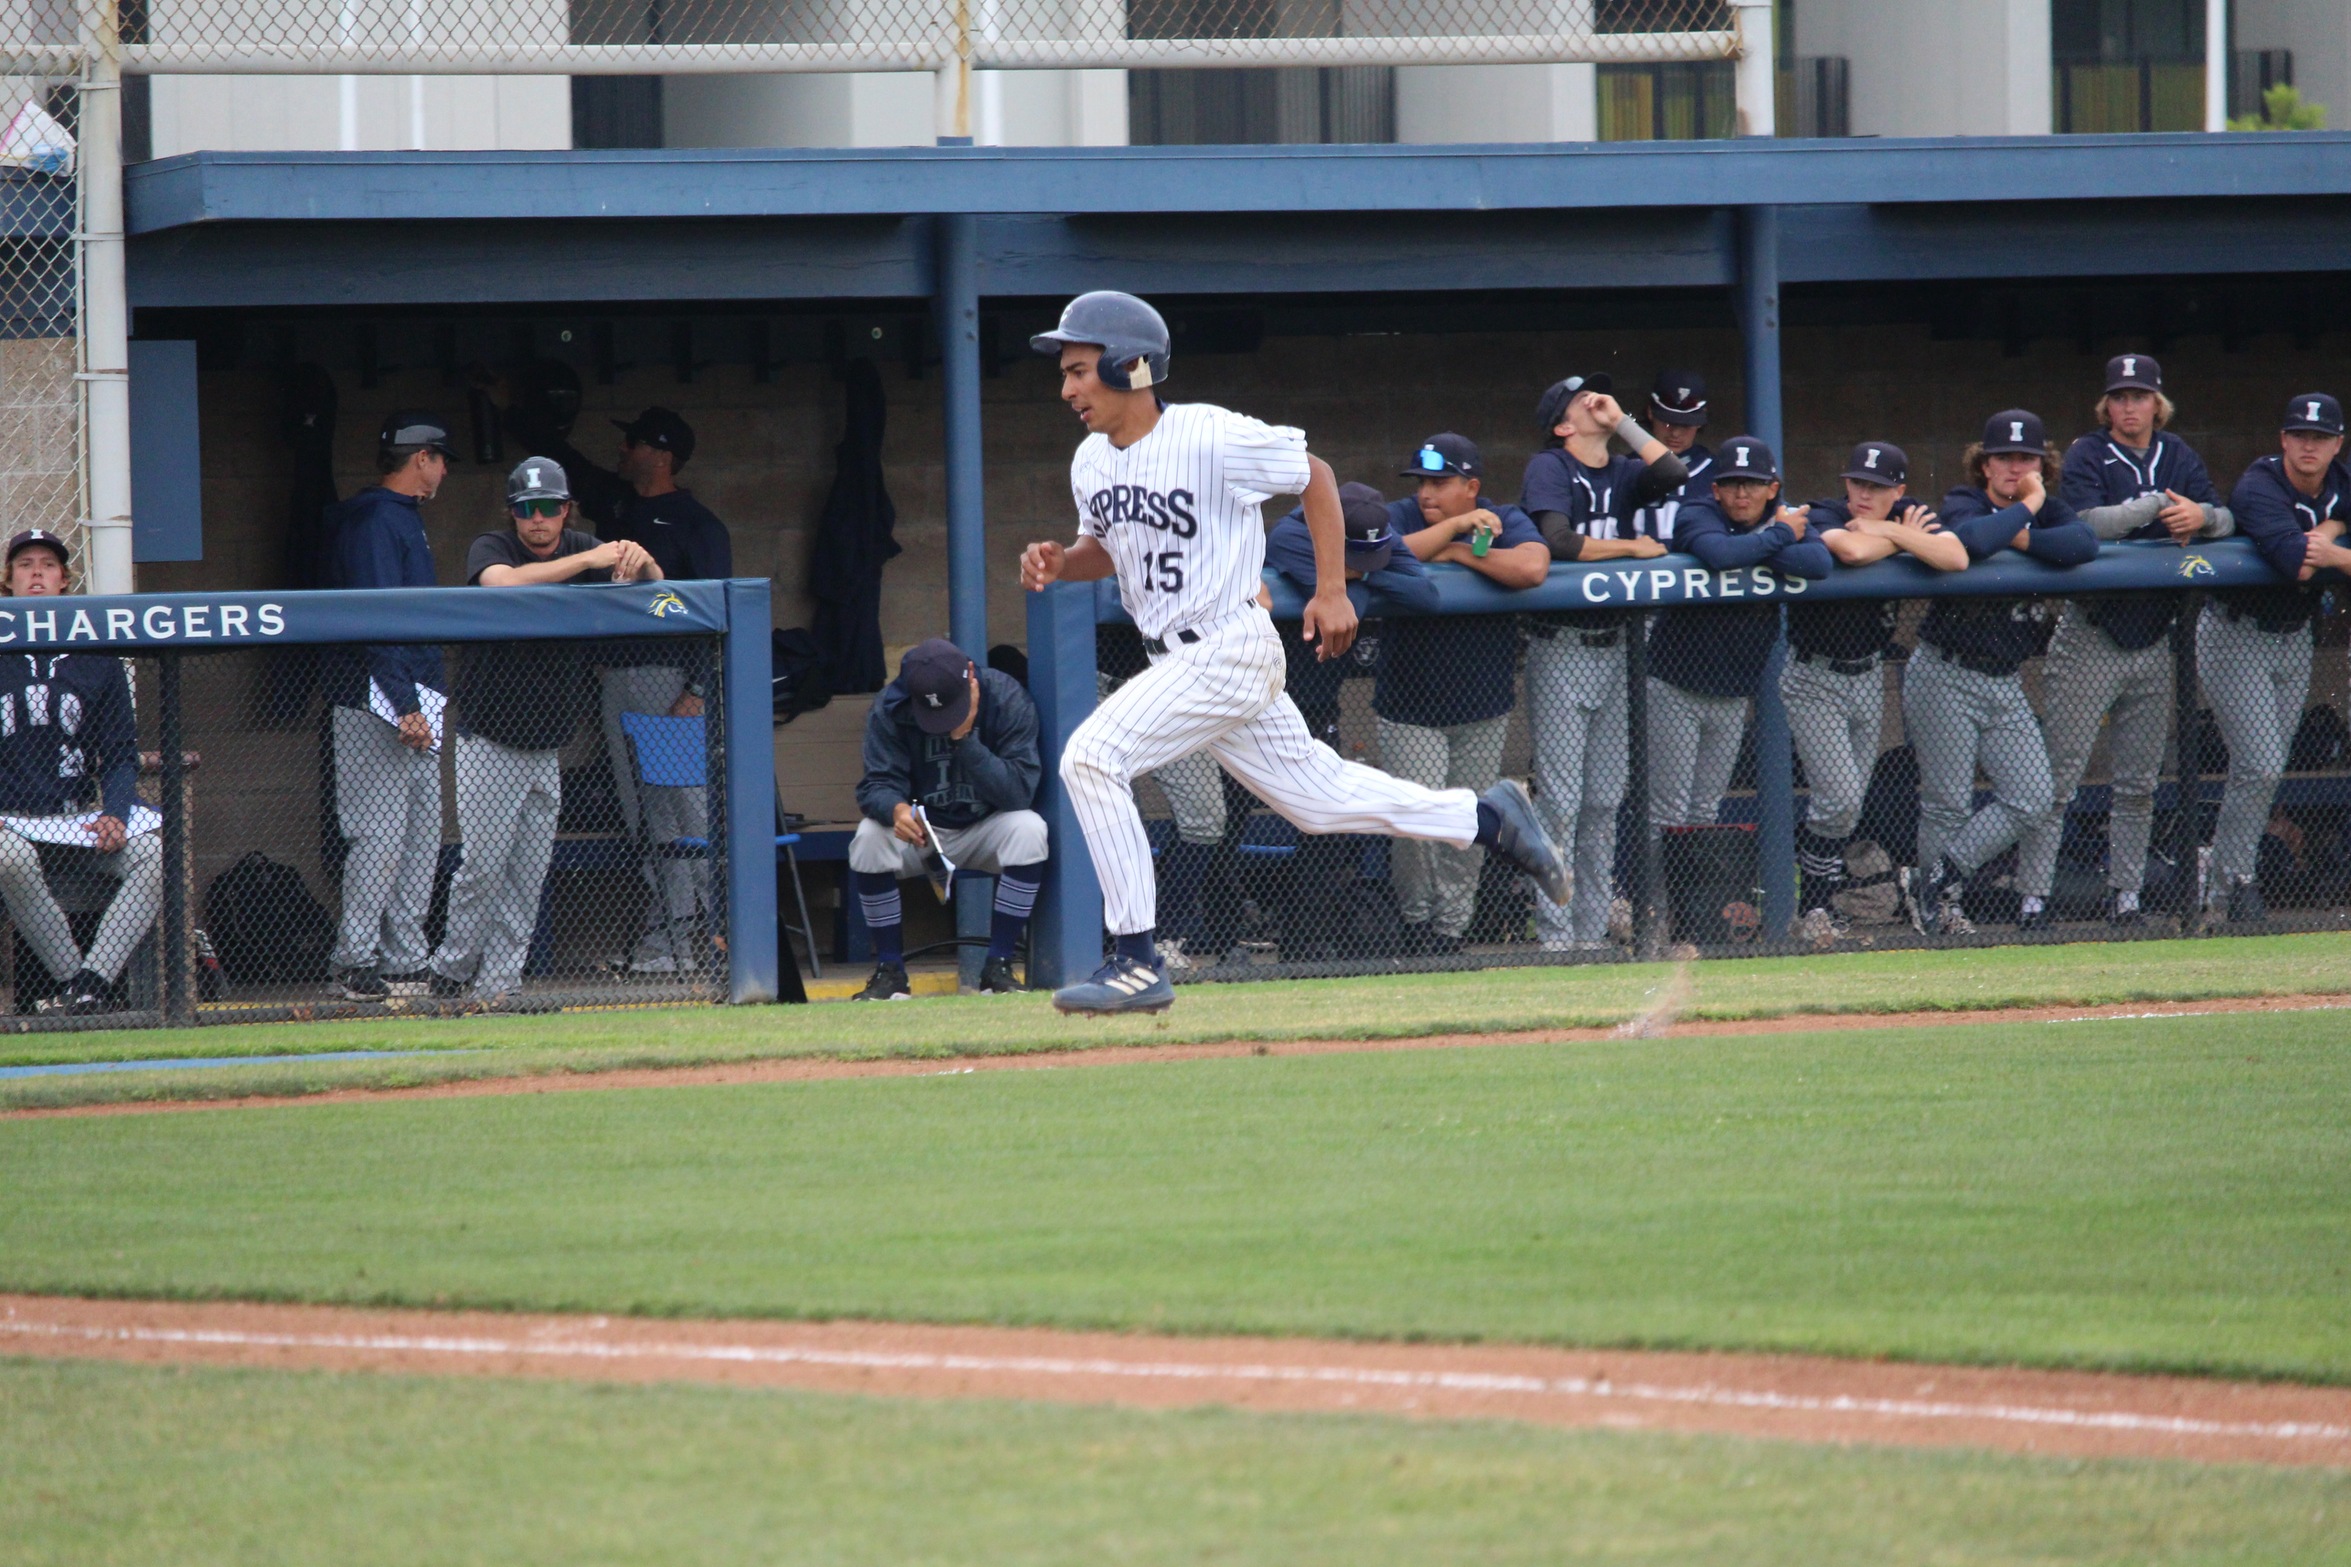 Tostado Comes Up Clutch as Chargers Take Series Over Lasers